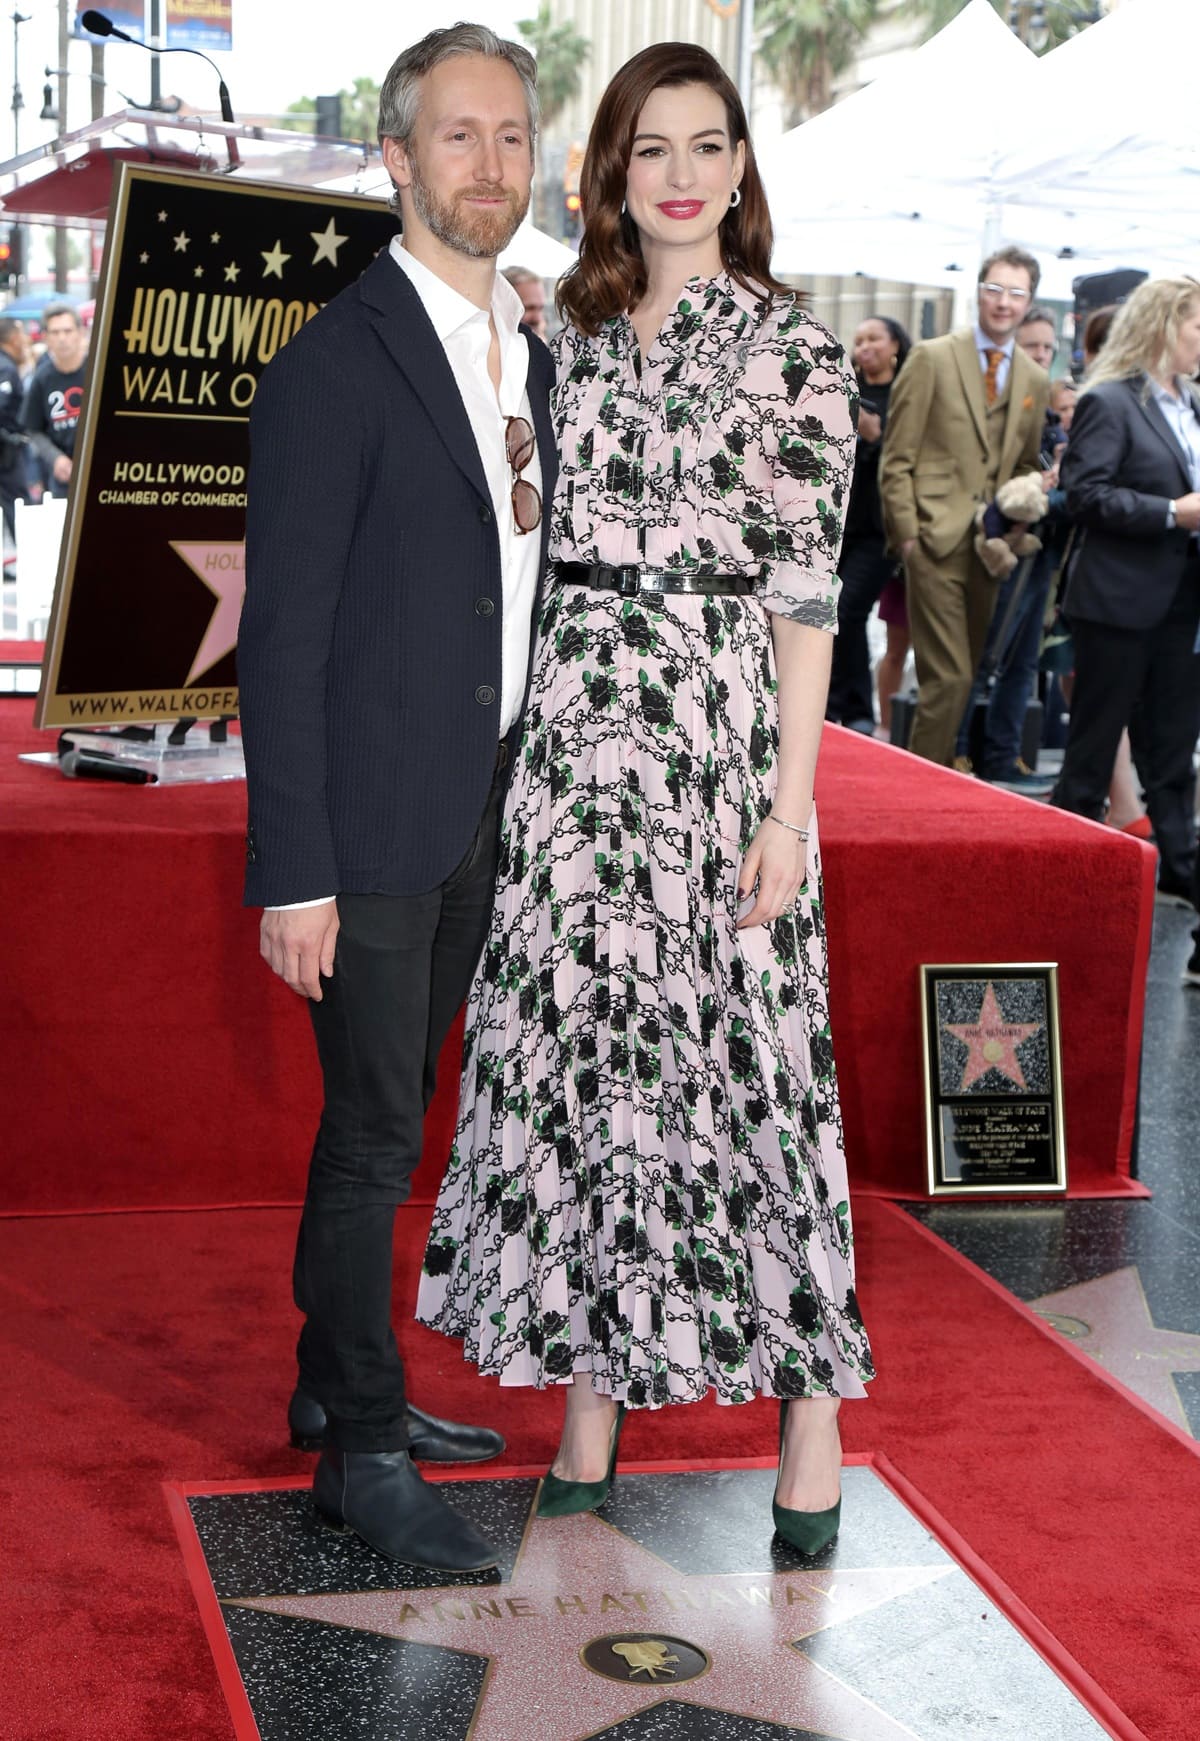 Anne Hathaway, wearing heels and appearing the same height as Adam Shulman, attended the ceremony honoring her with a star on the Hollywood Walk of Fame on May 9, 2019, in Hollywood, California